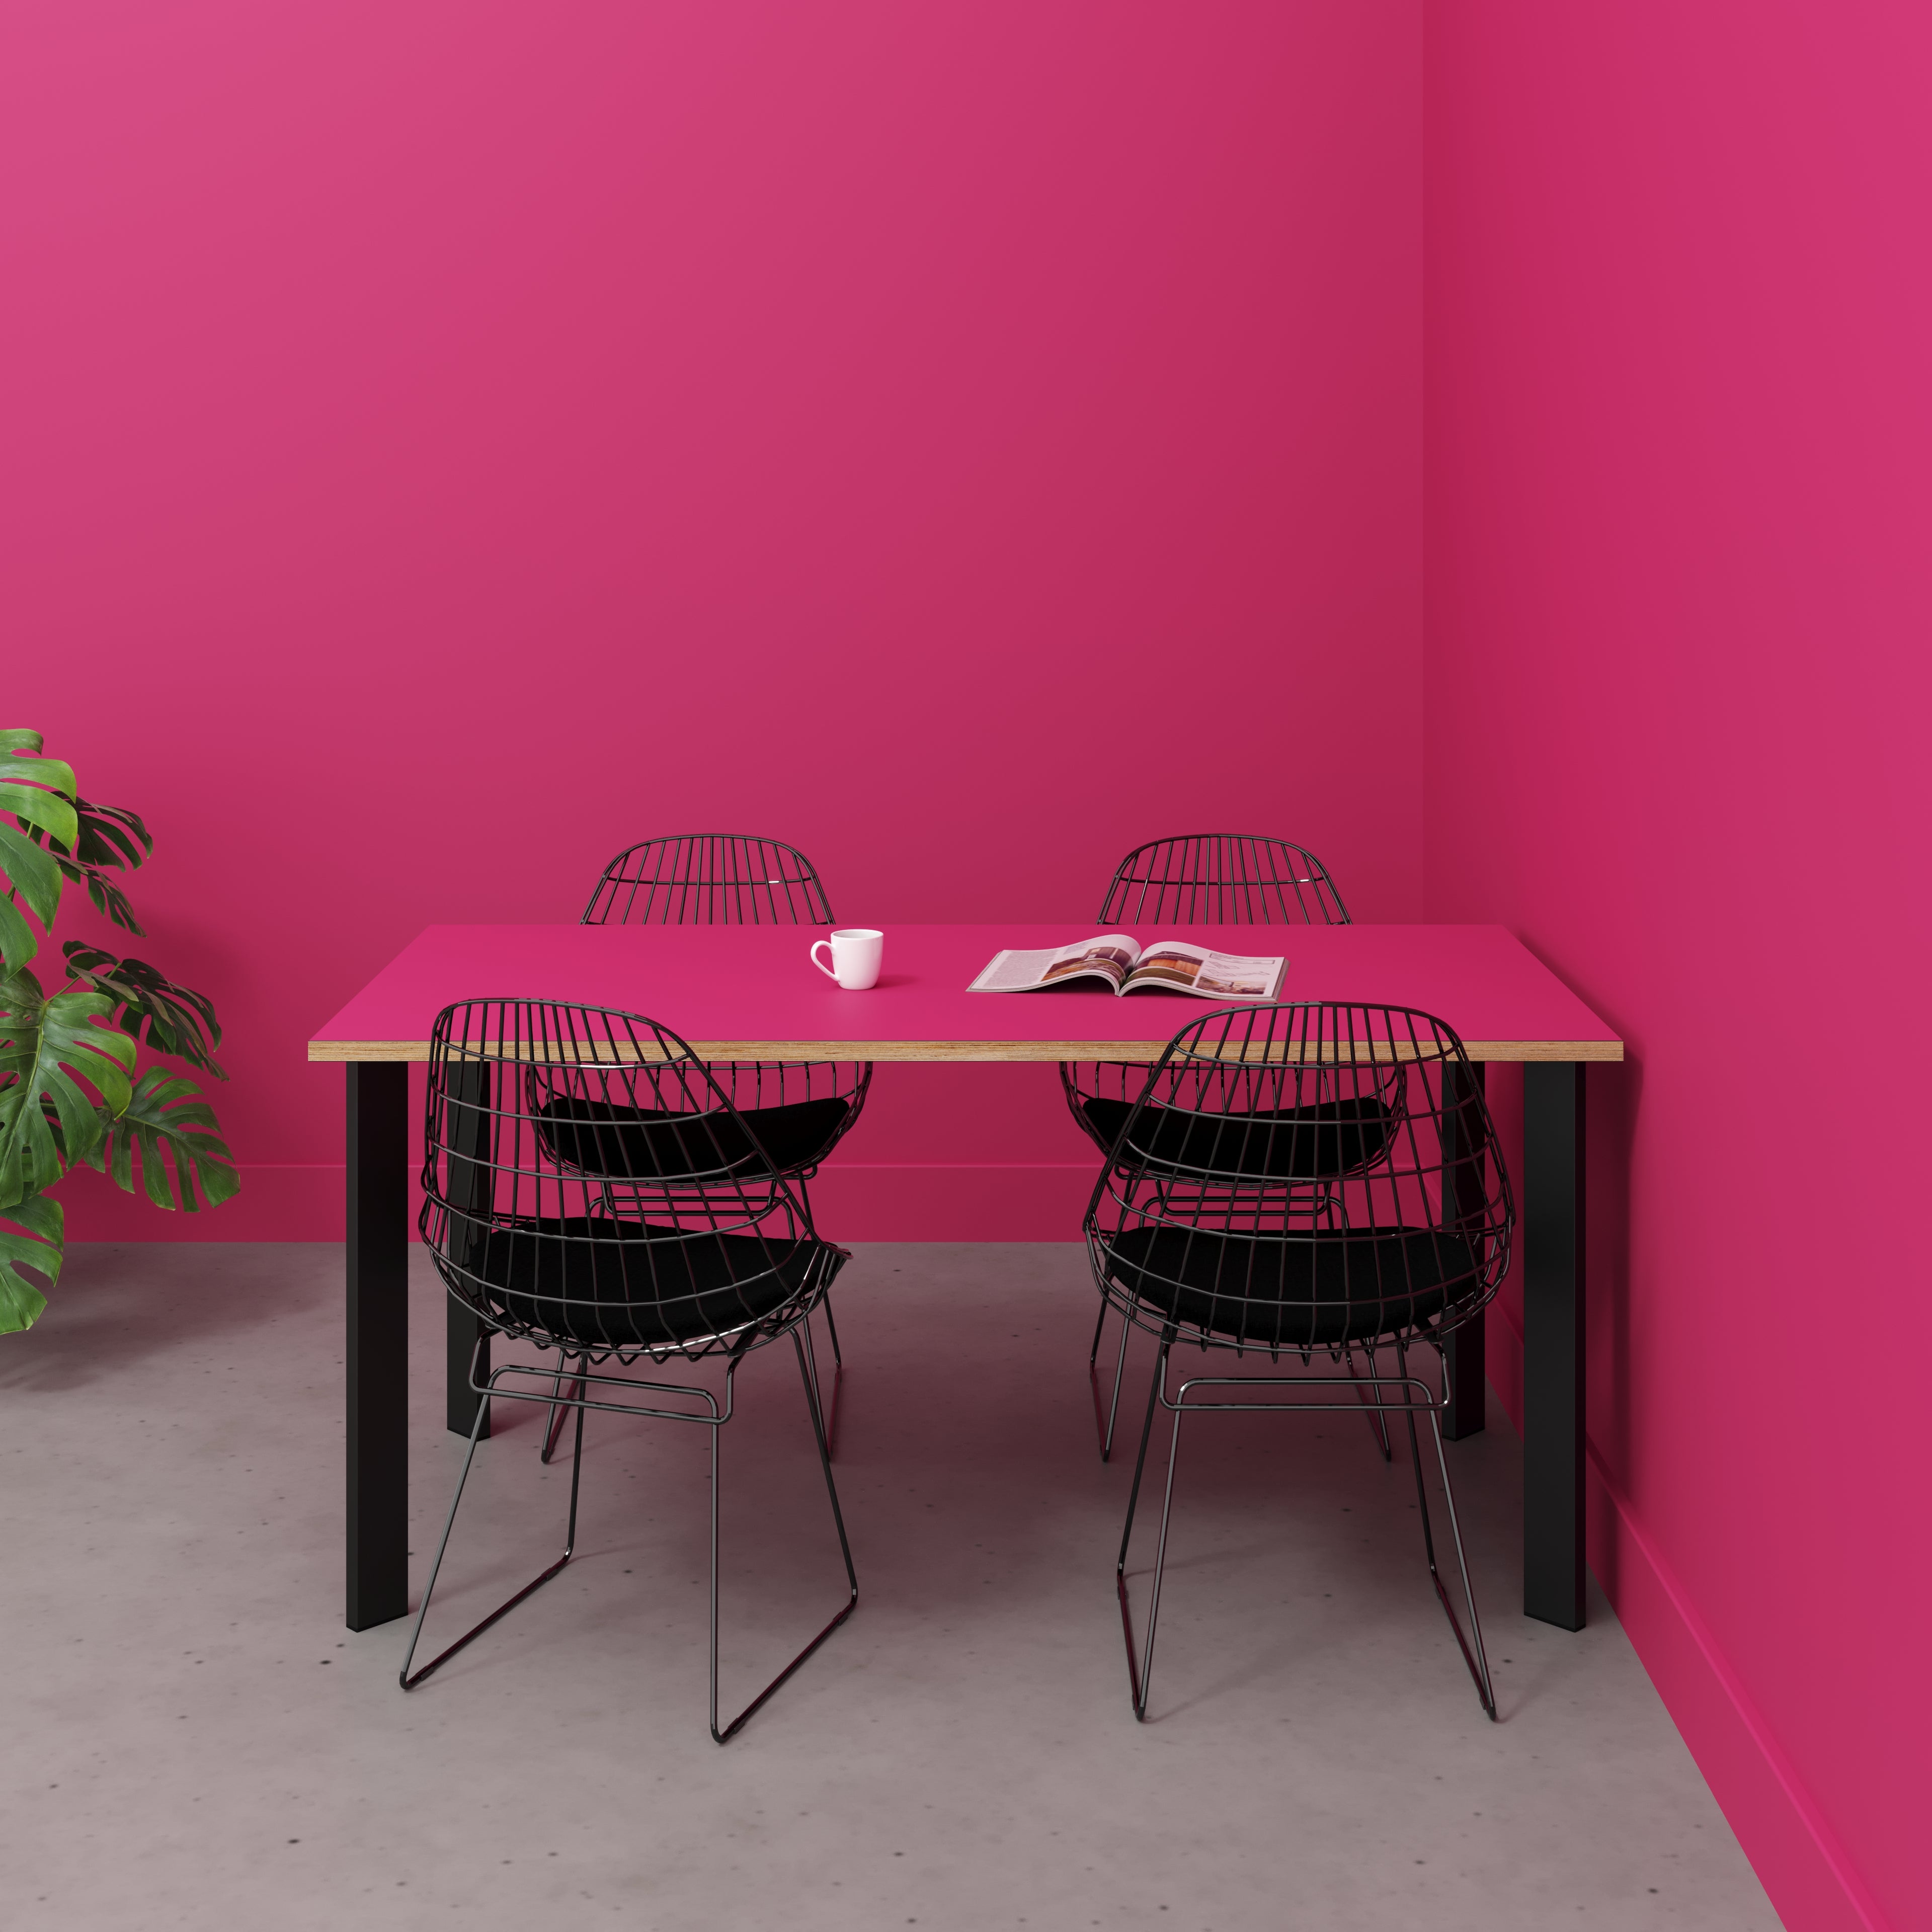 Table with Black Rectangular Single Pin Legs - Formica Juicy Pink - 1600(w) x 800(d) x 735(h)